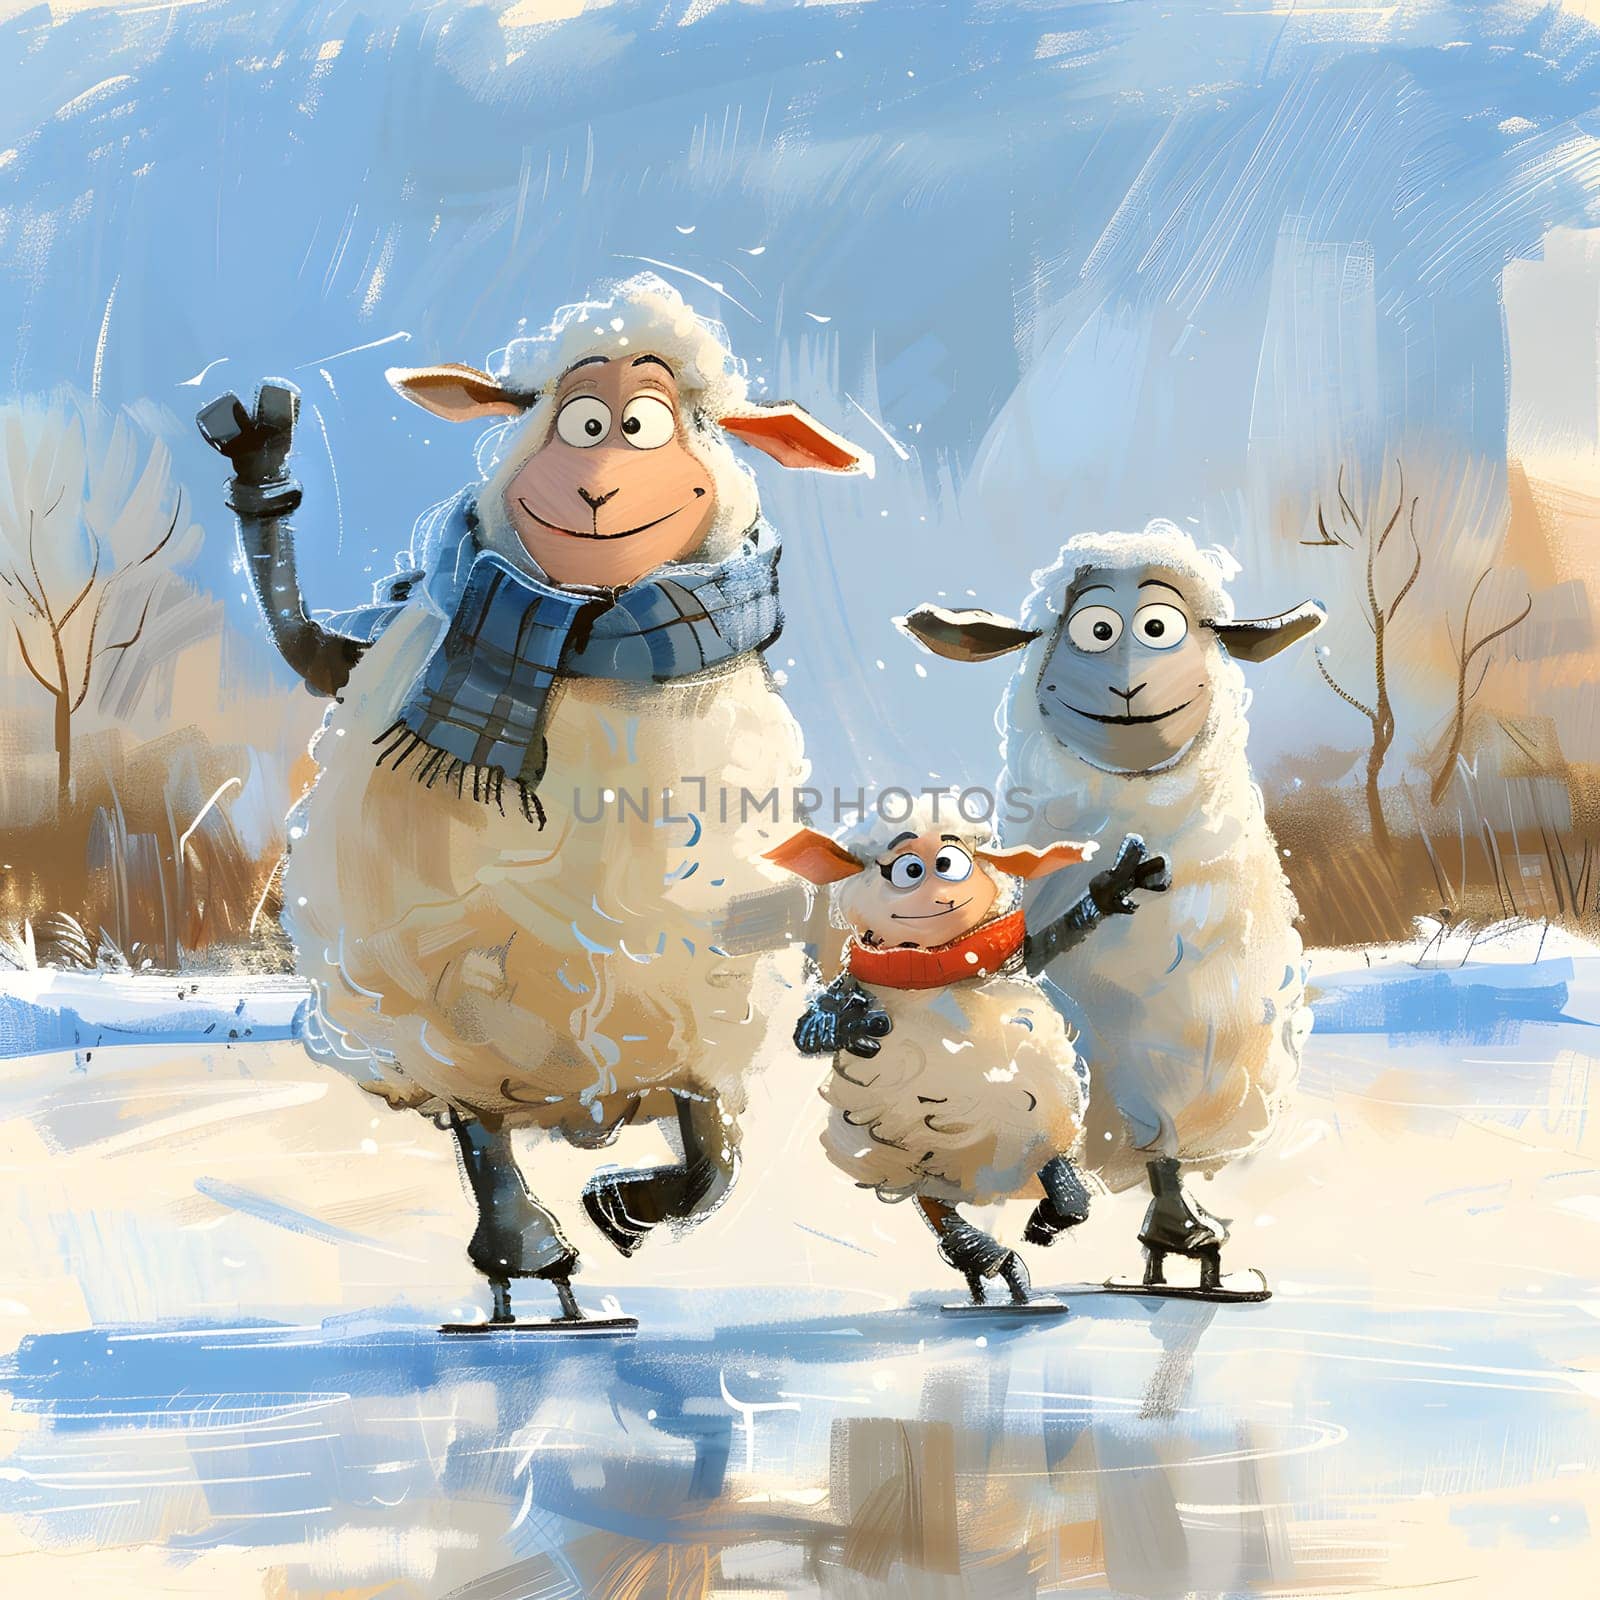 A joyful painting of three sheep ice skating under the sky in a snowy landscape. The artwork captures the happy and free atmosphere of the livestock enjoying the freezing weather